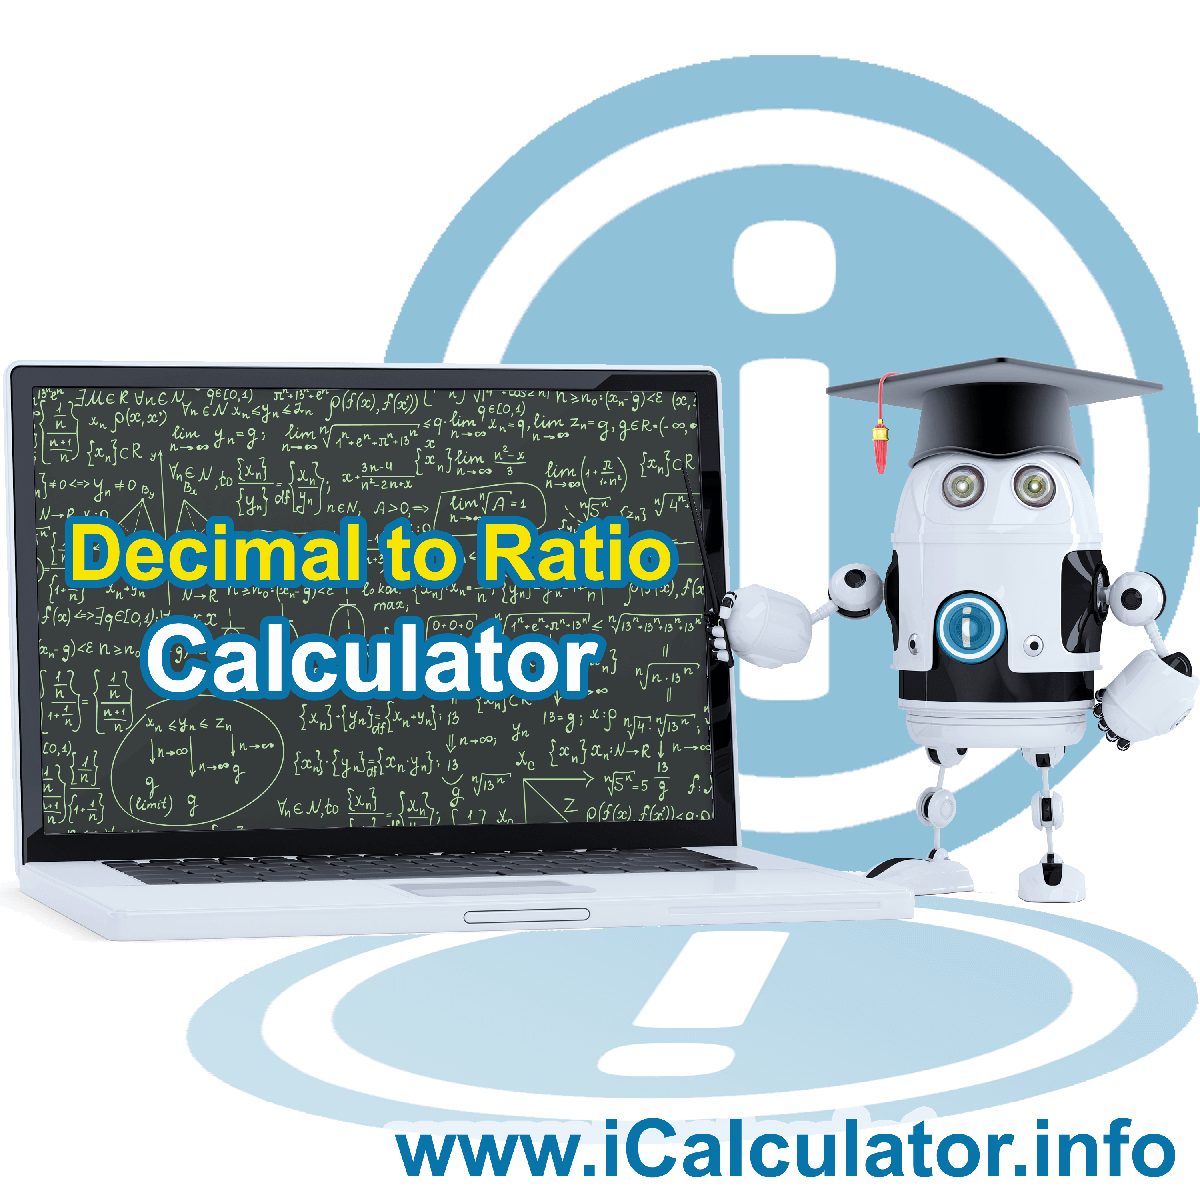 Decimal To Ratio. This image shows the properties and decimal to ratio formula for the Decimal To Ratio